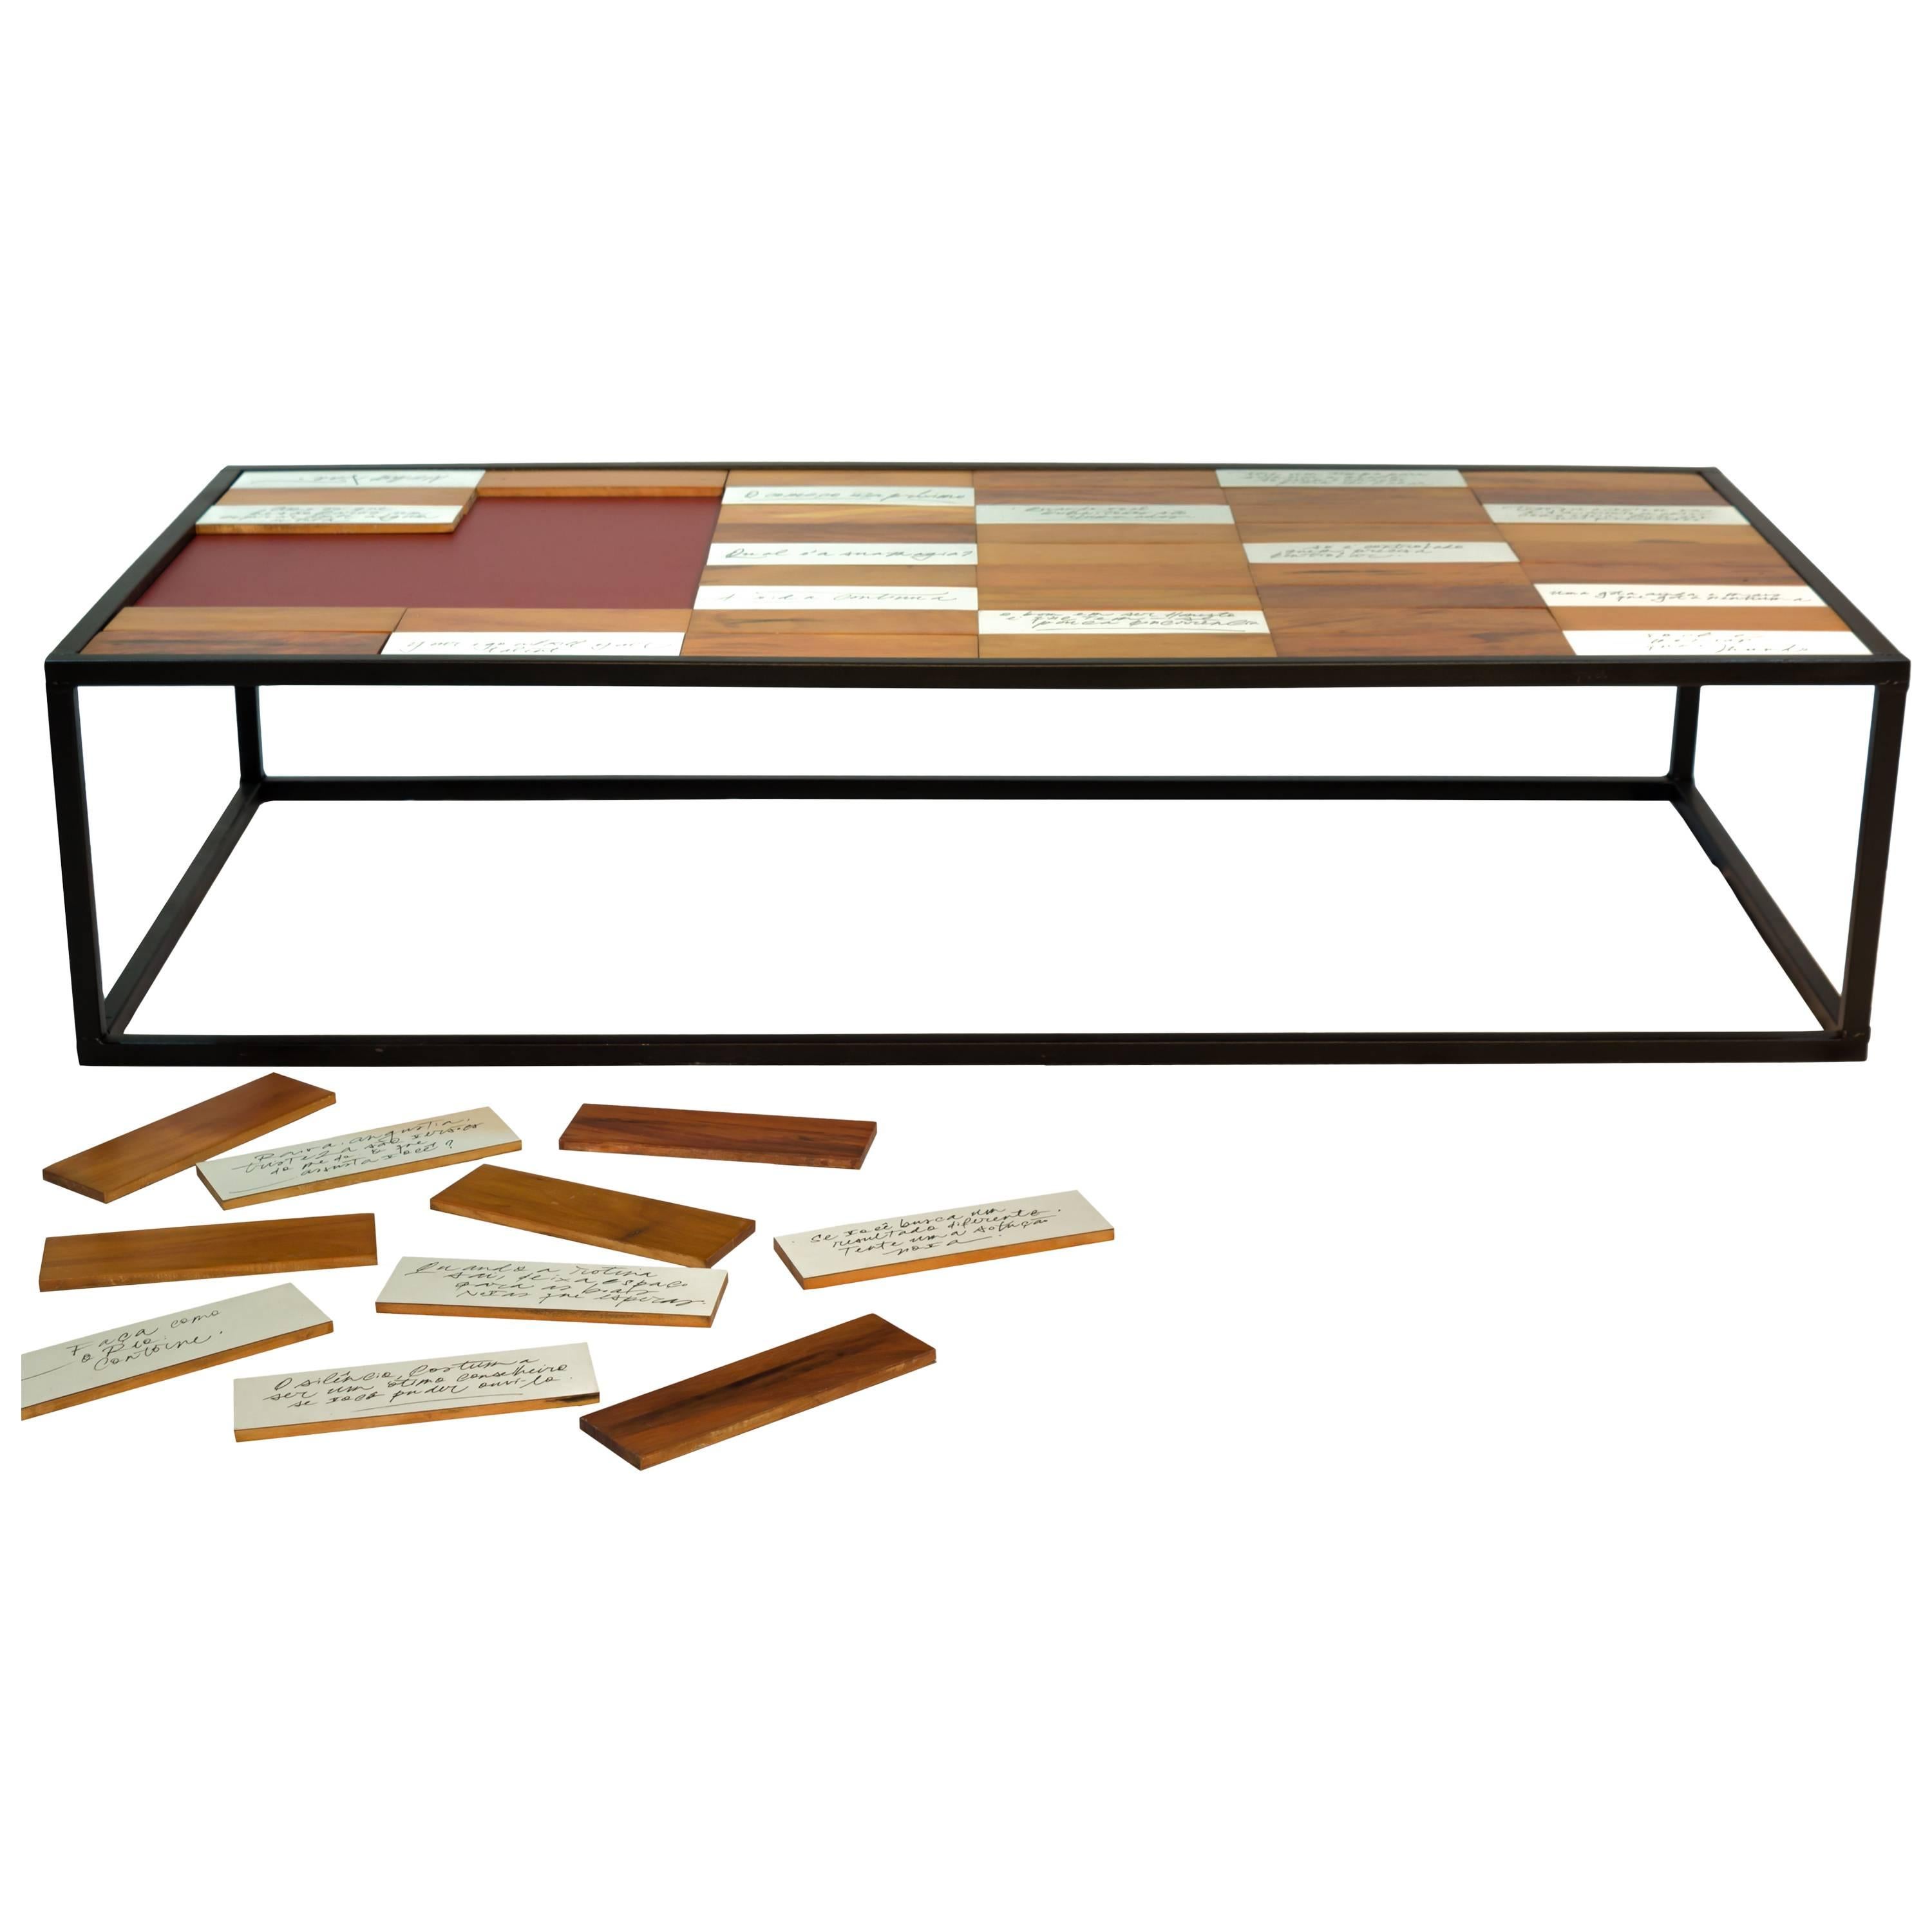 Coffee Table in Peroba Wood Parquet, Brazilian Contemporary Style